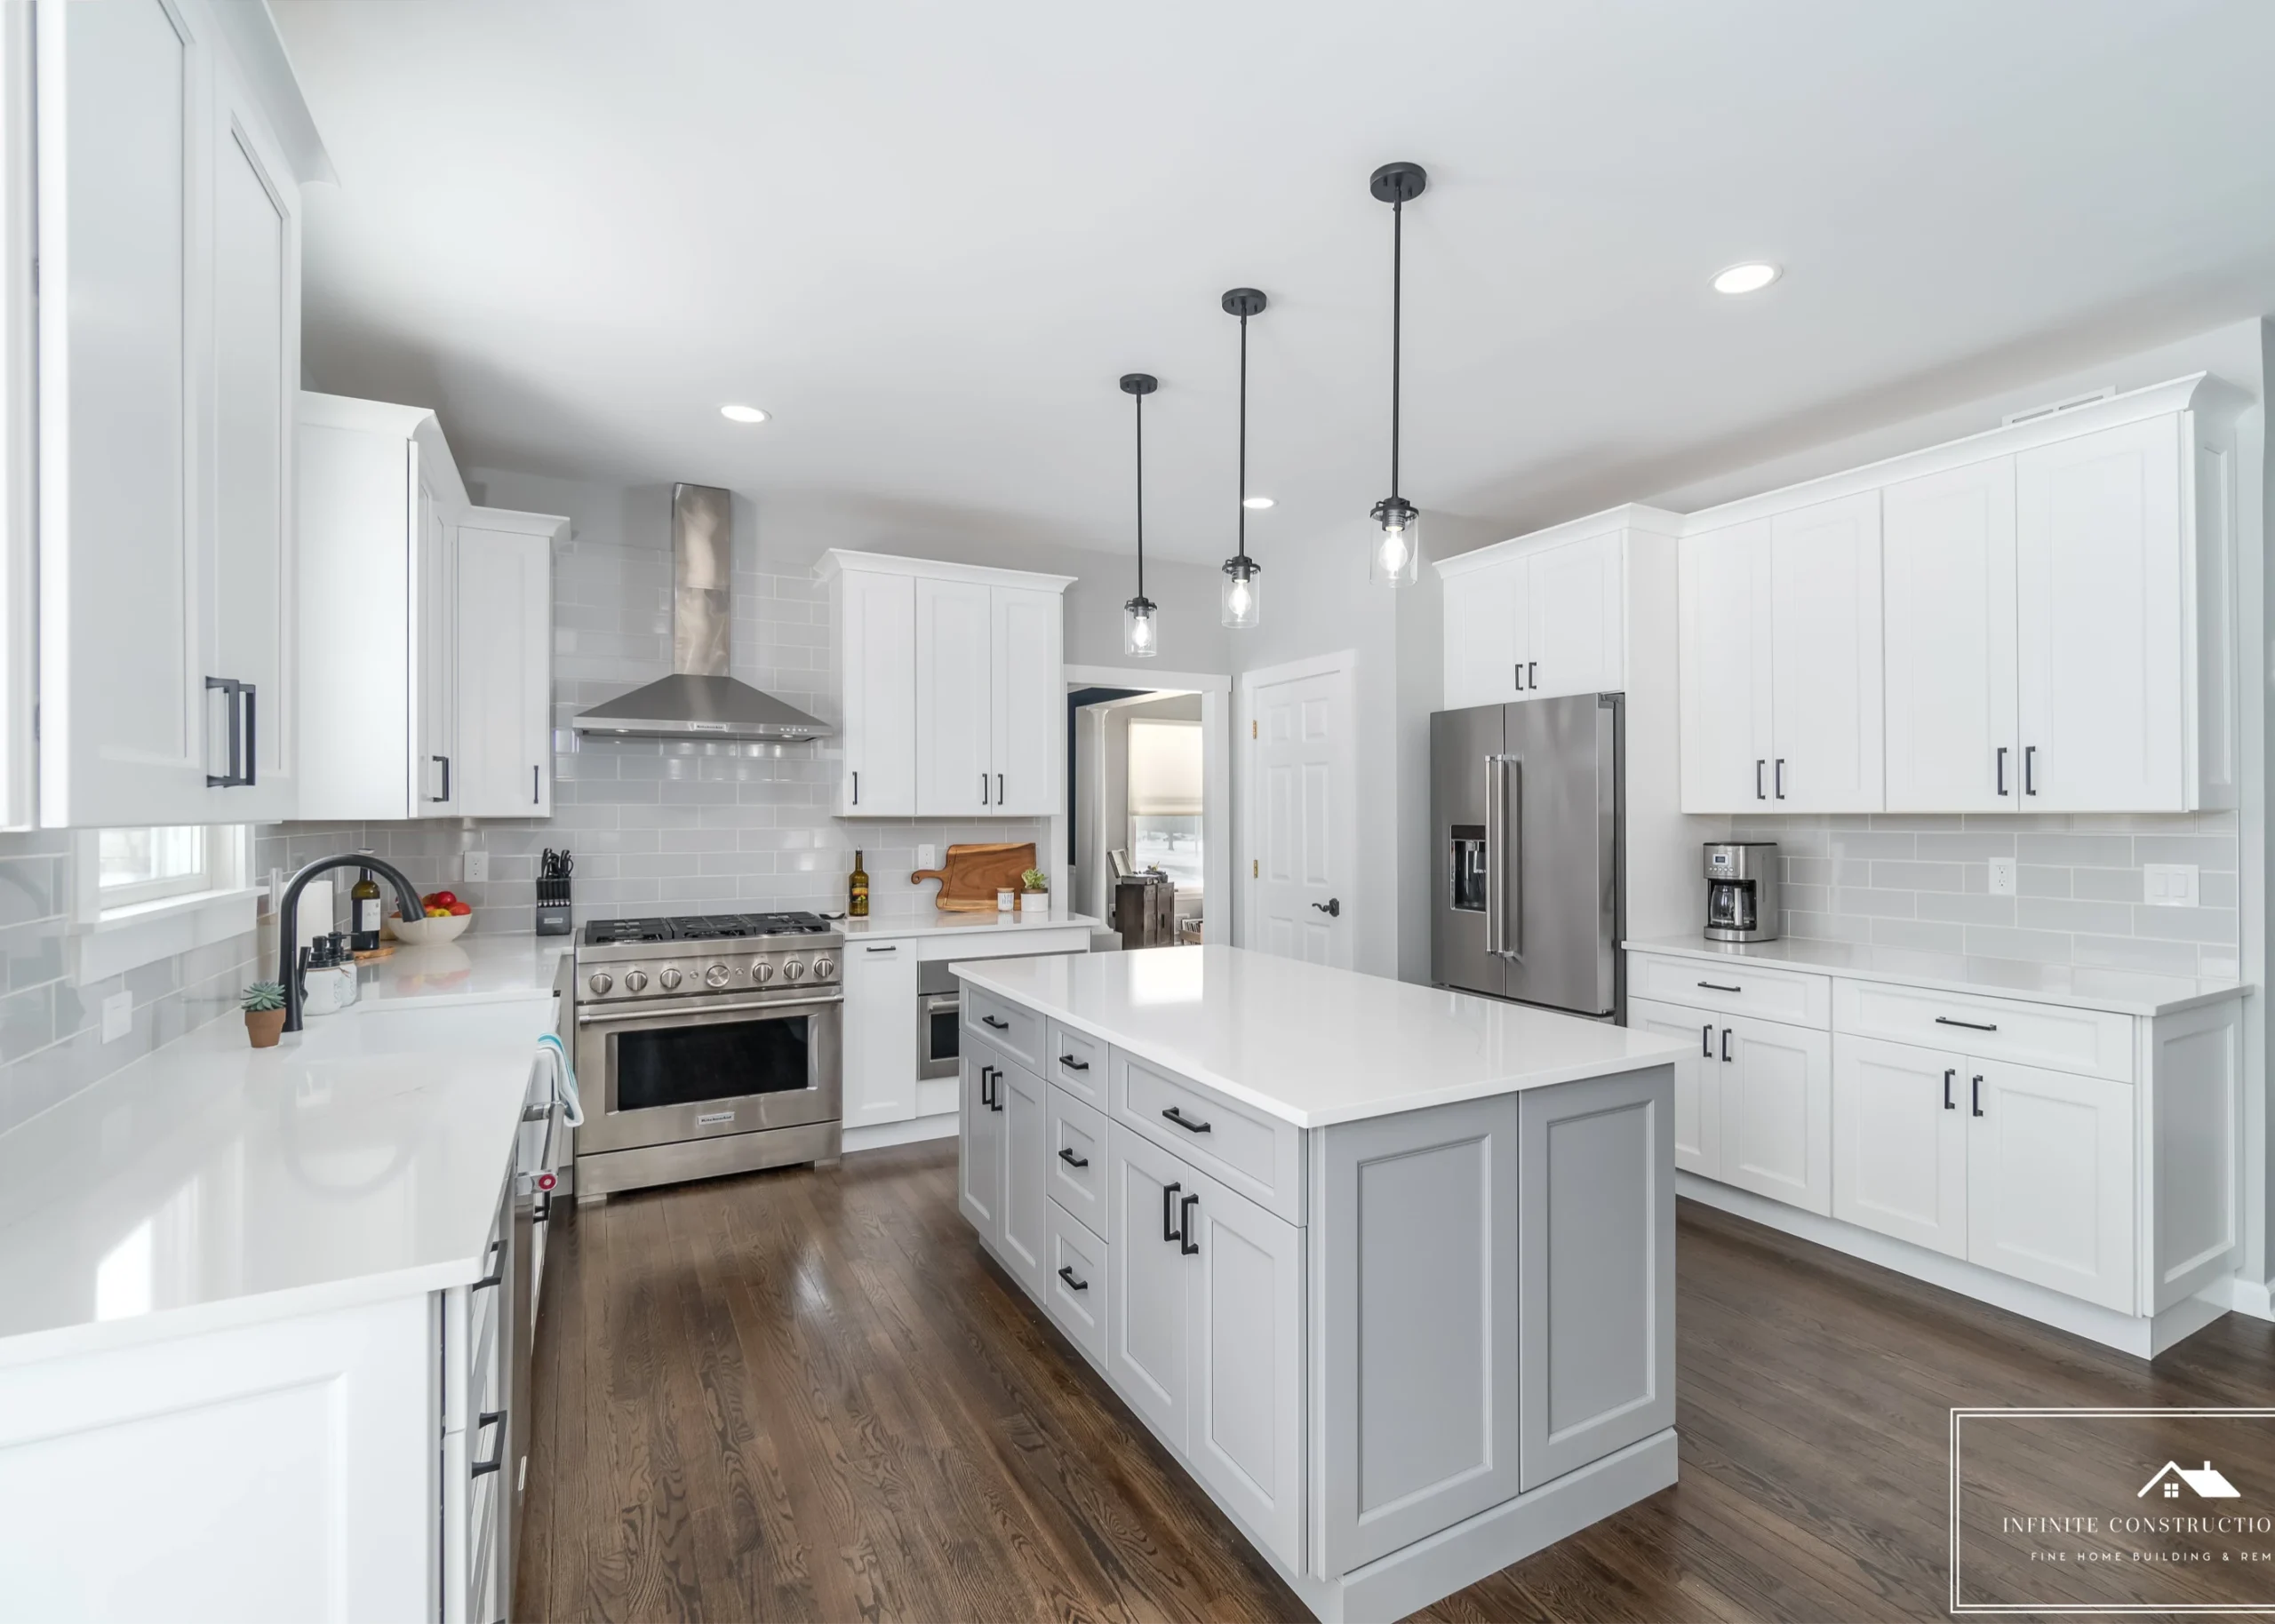 Kitchen Remodeling Services in NJ